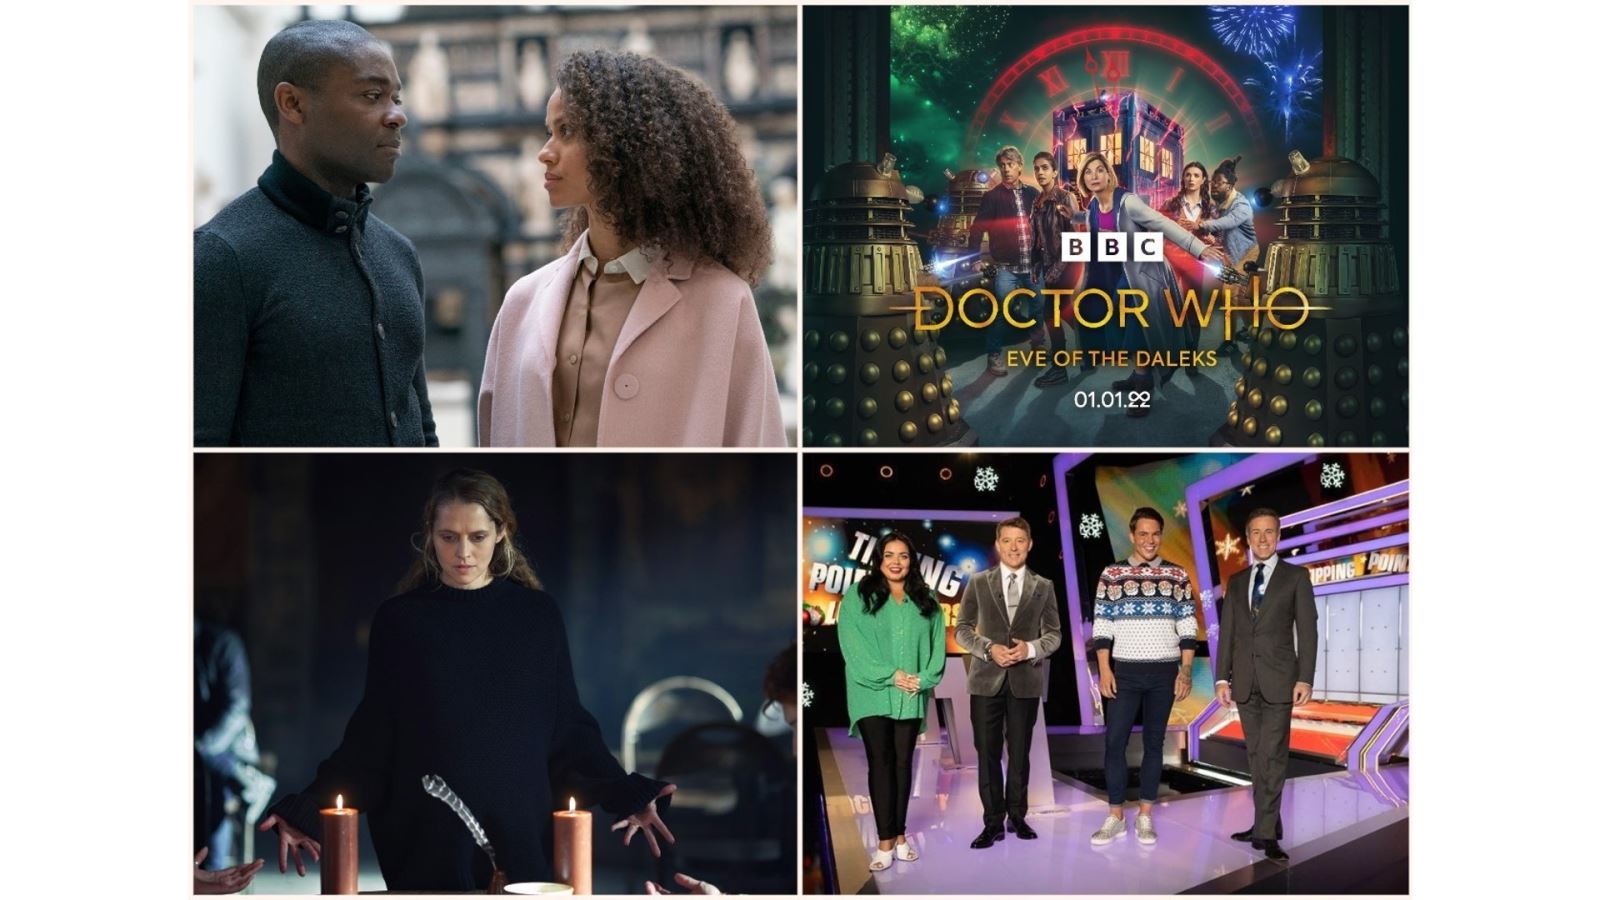 Clockwise from top left: The Girl Before (BBC One/HBO Max), Doctor Who: Eve of the Daleks (BBC One), A Discovery of Witches series 3 (Sky Max/NOW TV), Tipping Point Lucky Stars Festive Special (ITV/RDF Television)